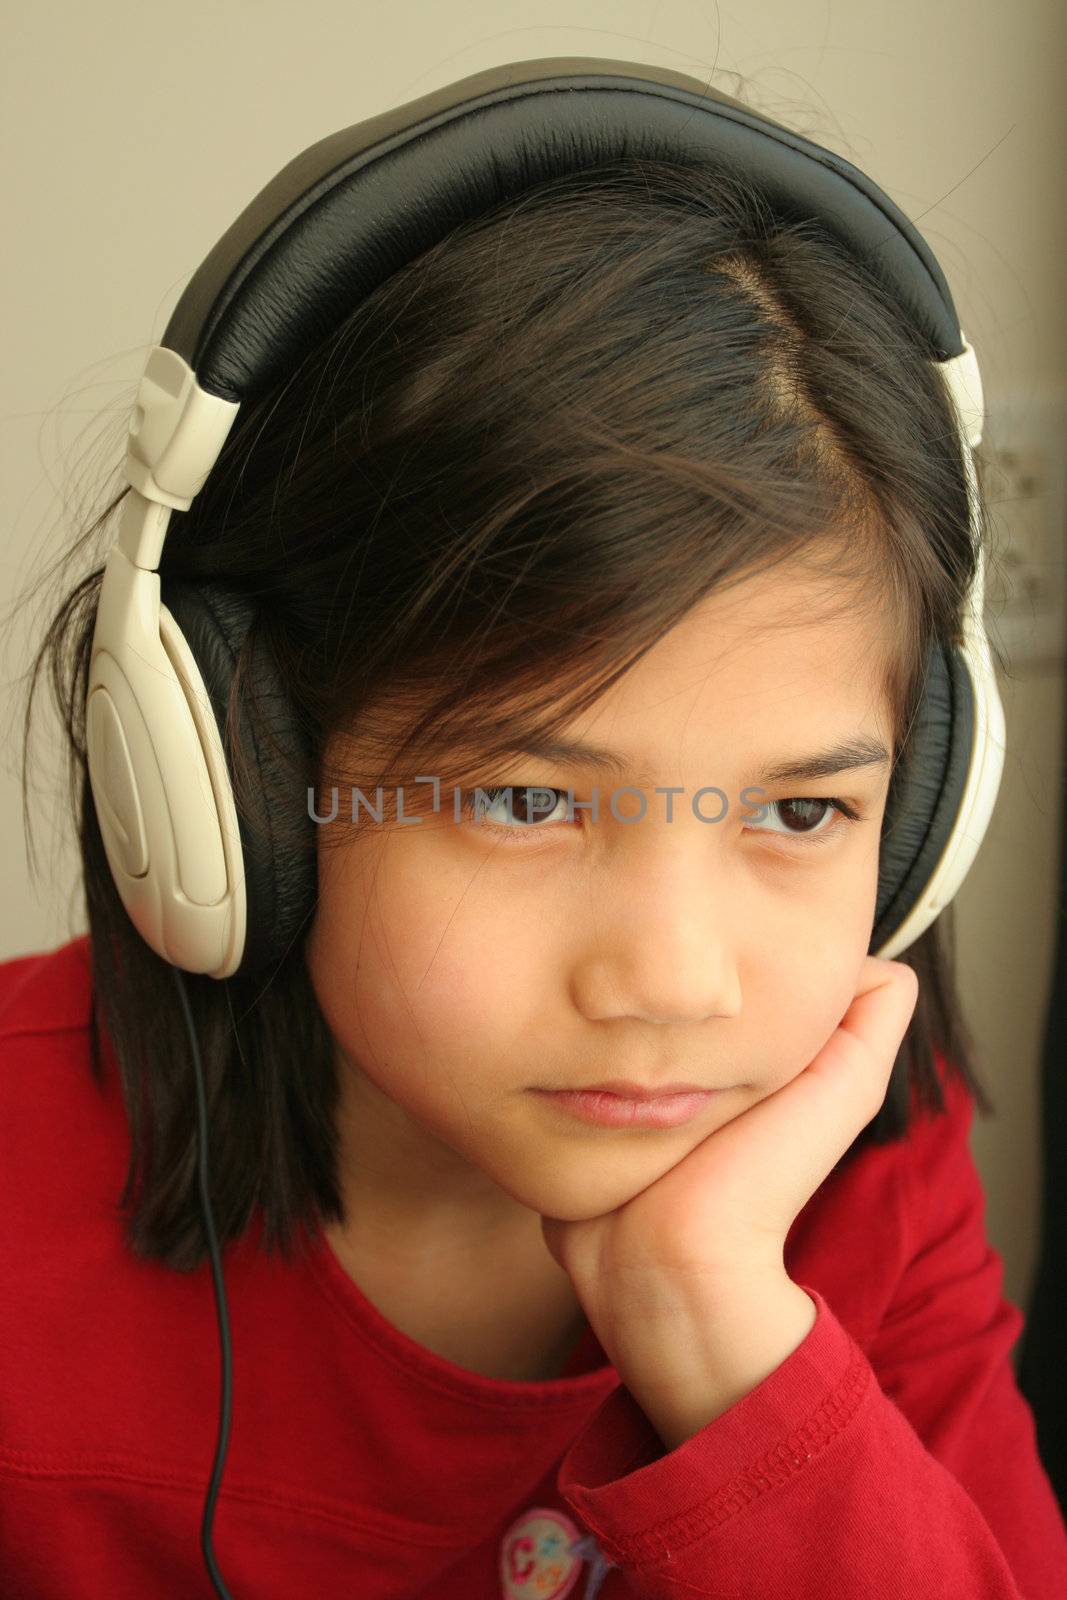 Child with sad expression listening to music on the headphones. Part asian, scandinavian descent.